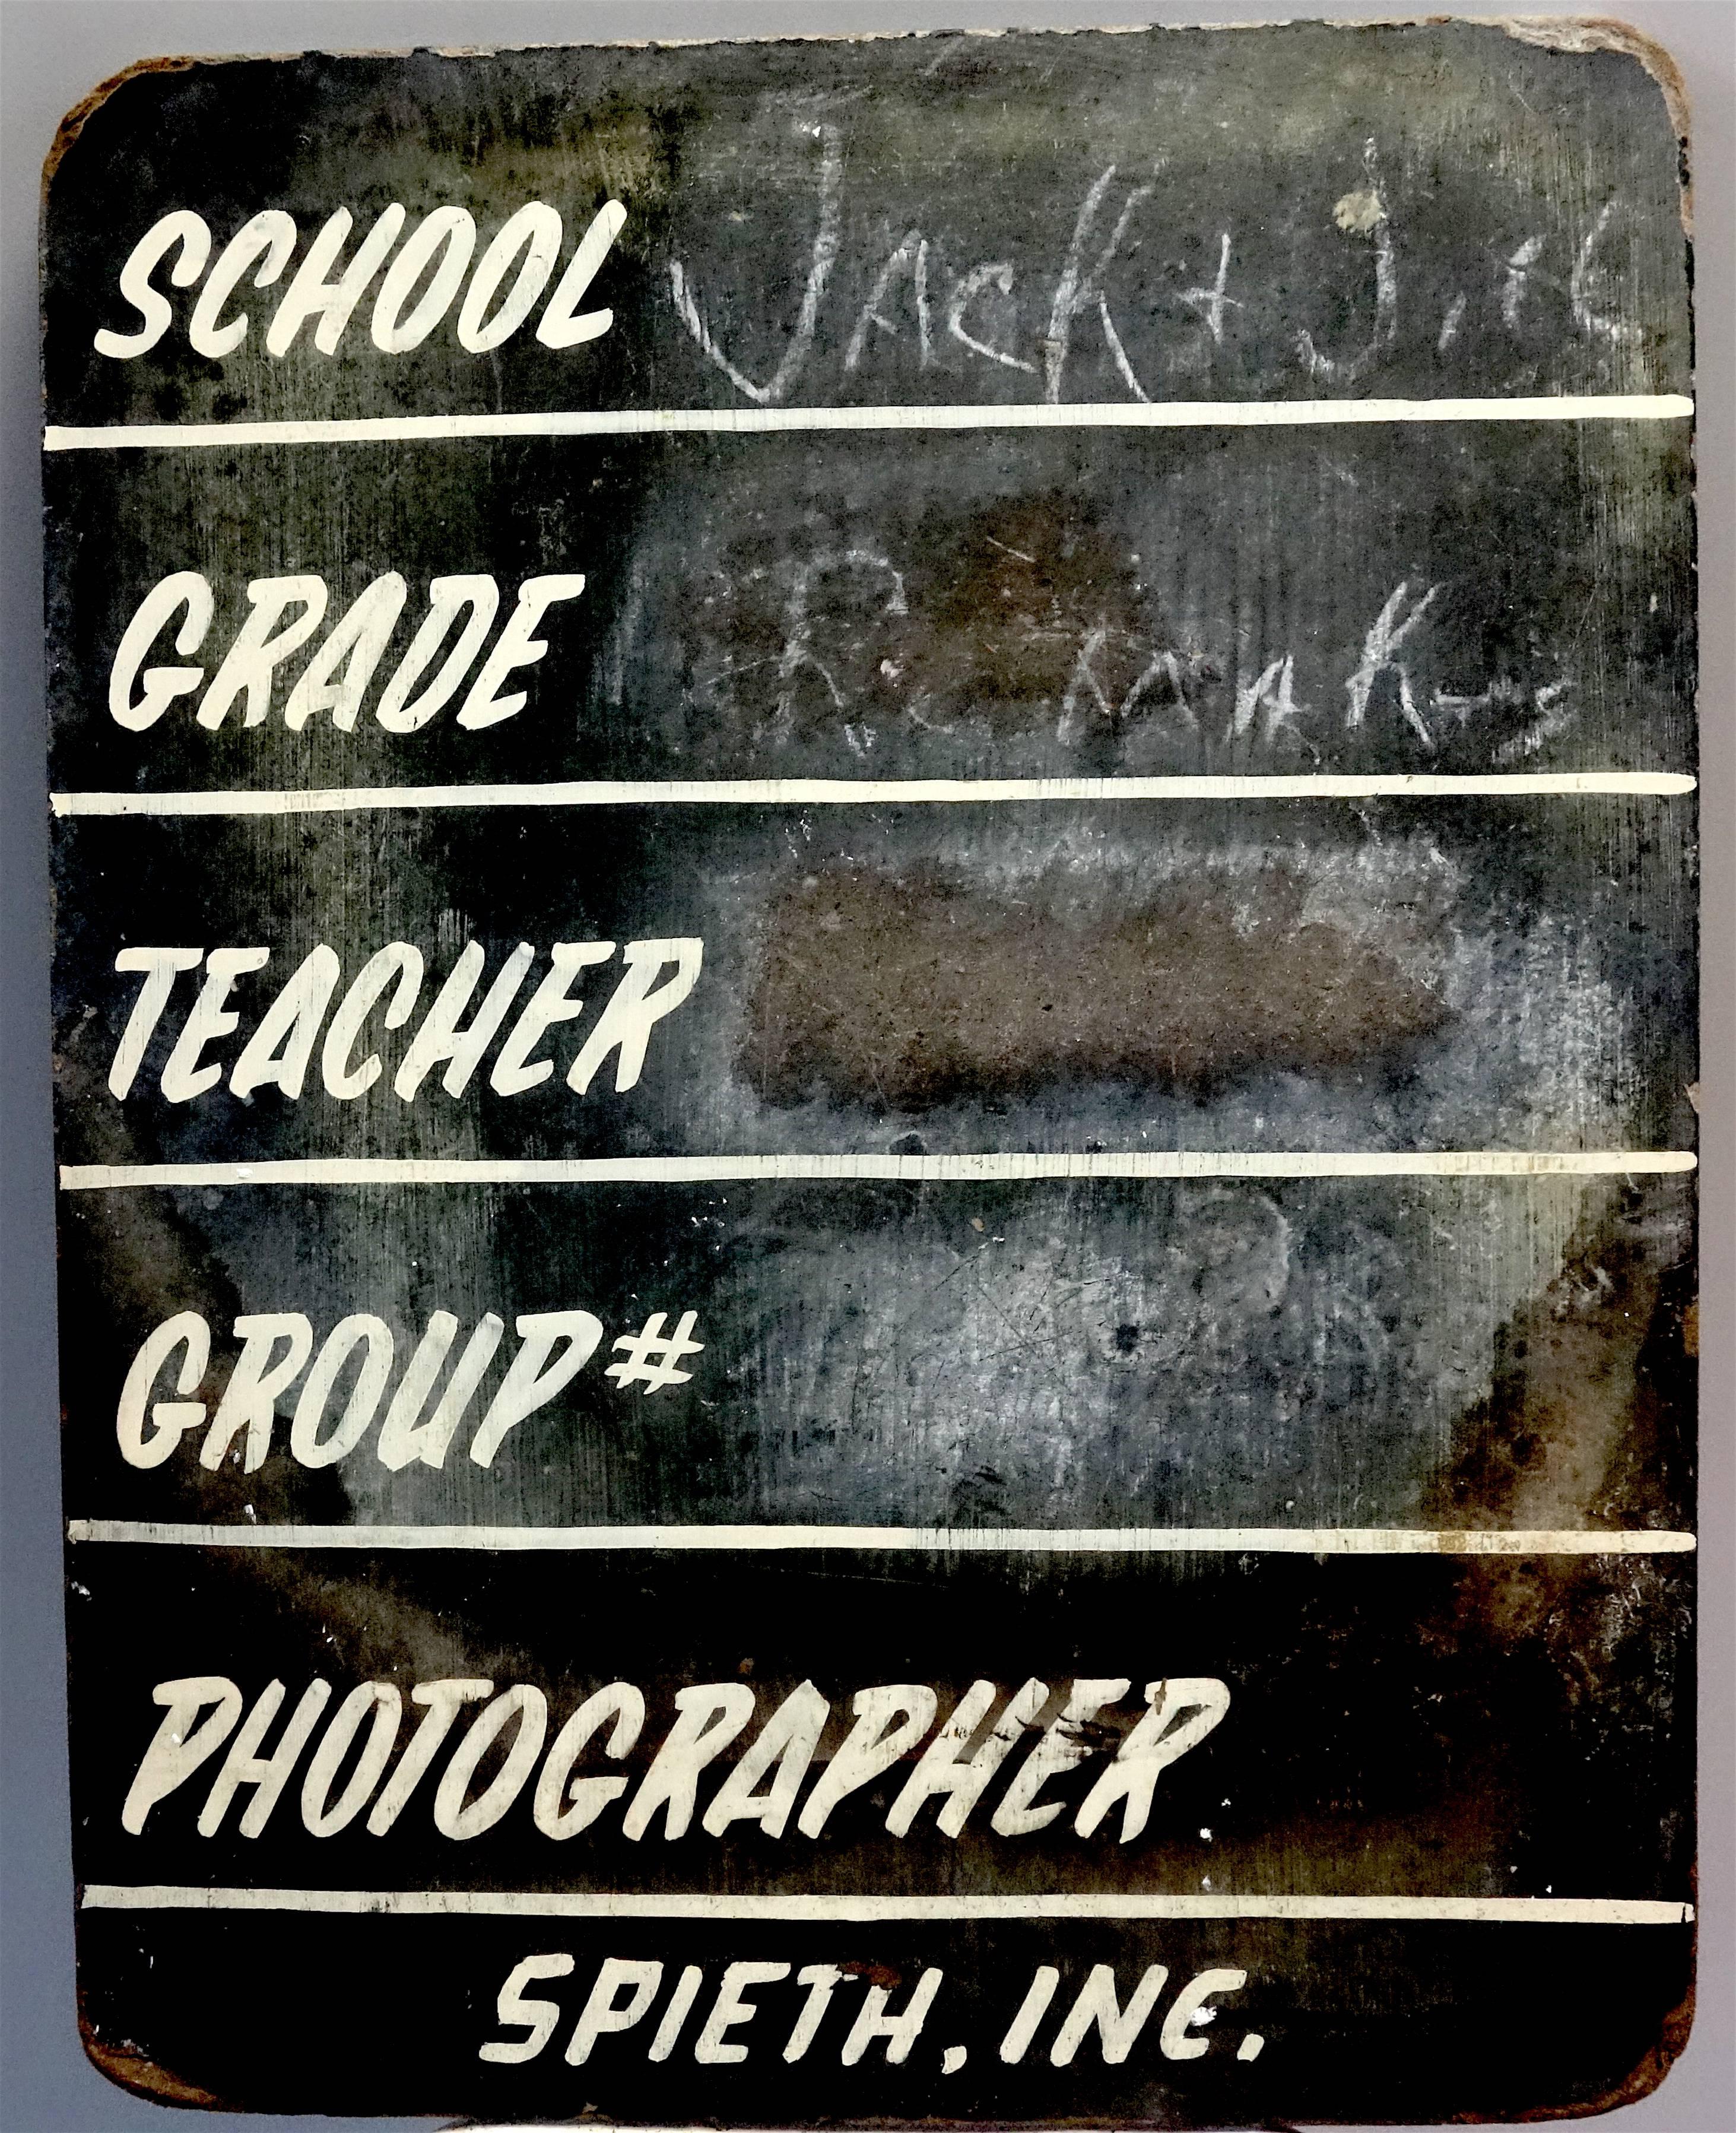 20th Century Vintage School Class Picture Roll Film Display Camera Much Patina. NOW $725.00 ! For Sale